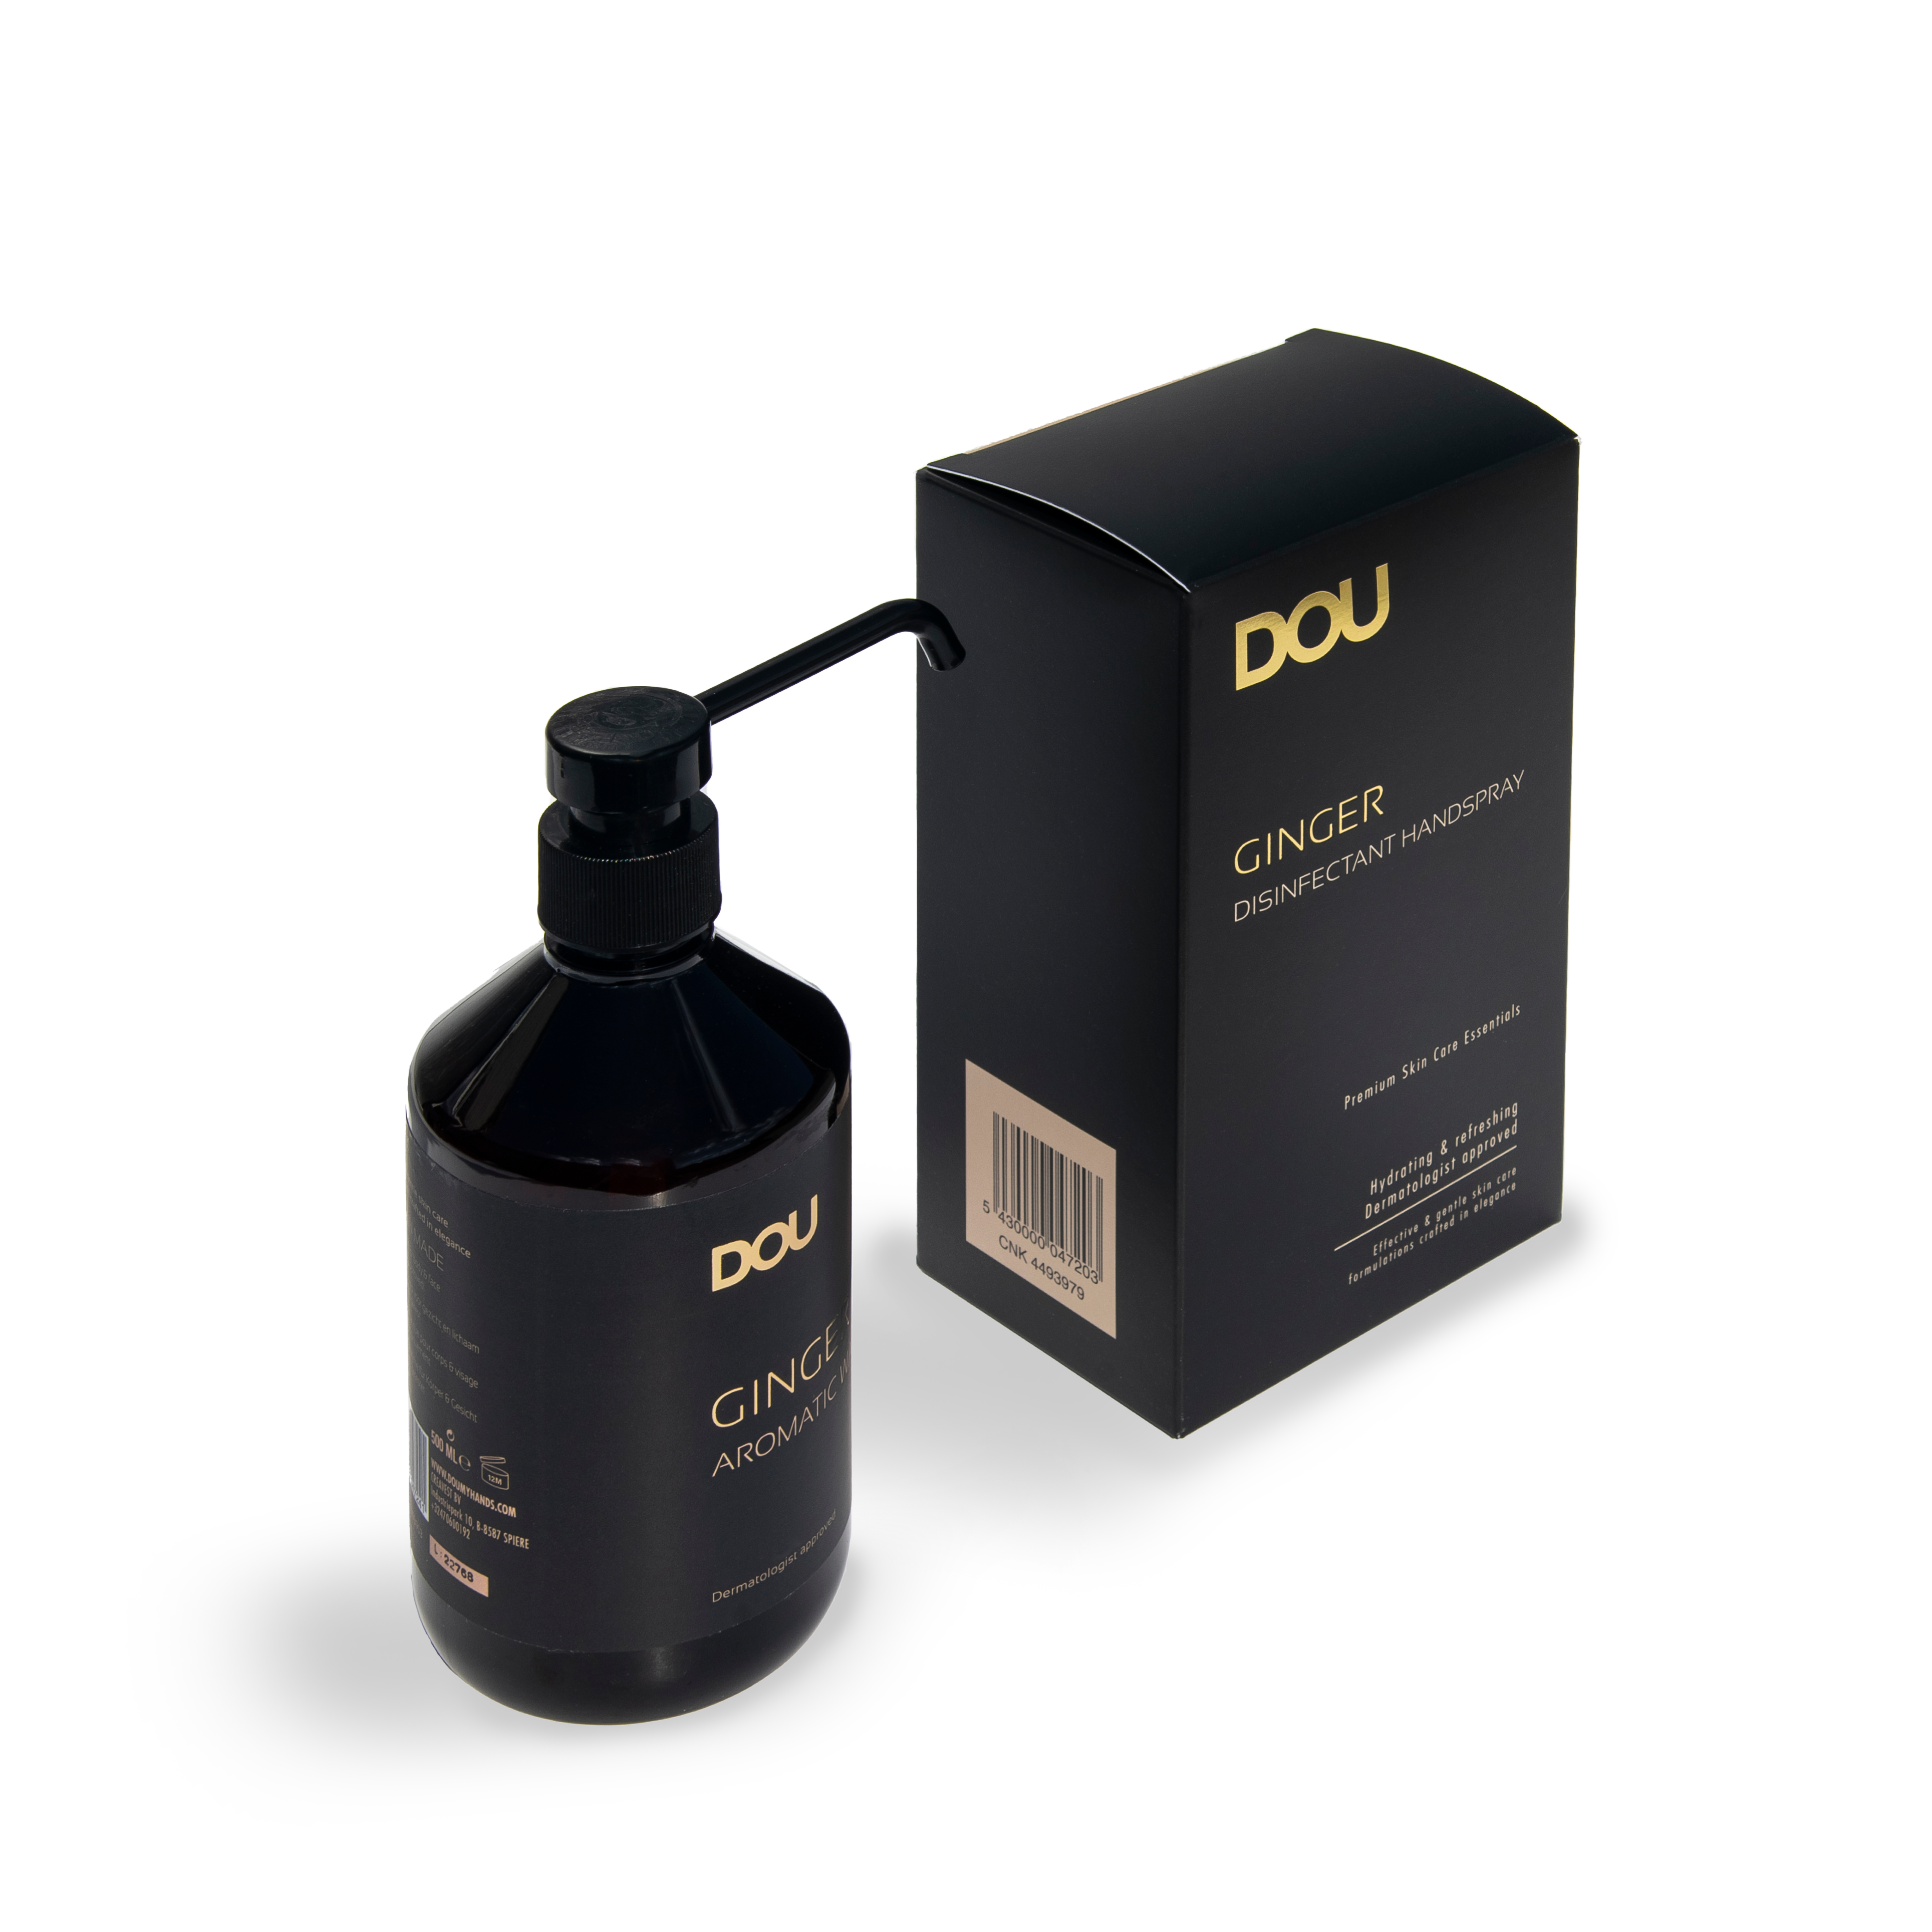 DOU My Hands Luxury Ginger Disinfectant Spray